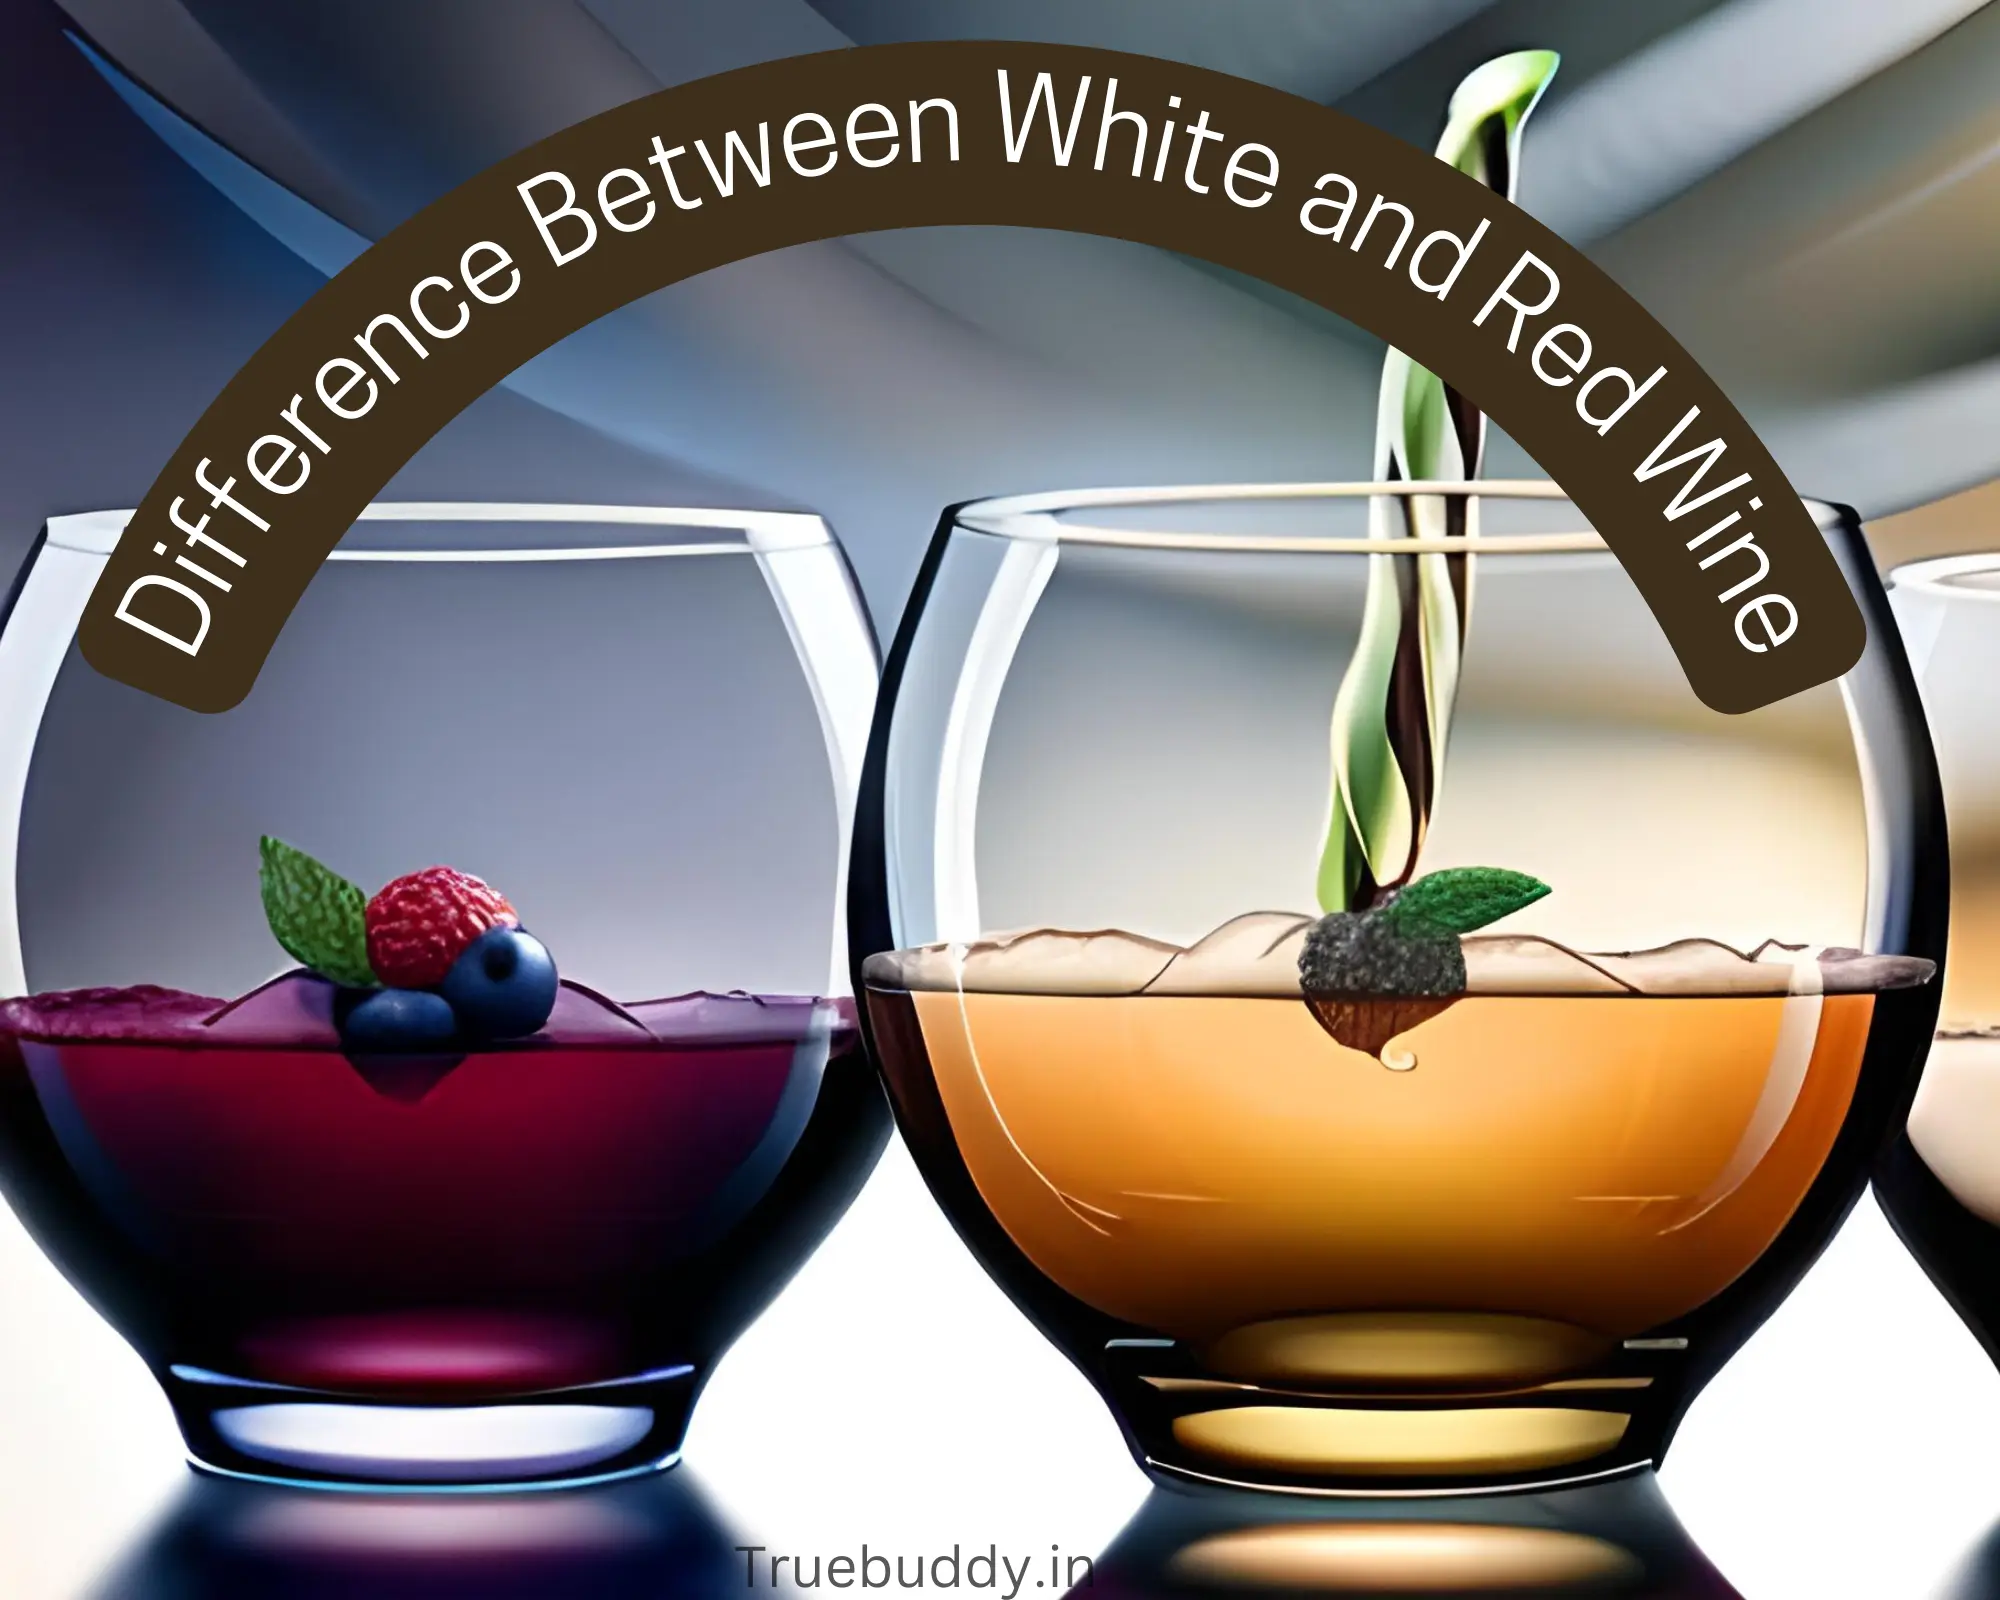 Difference Between White and Red Wine